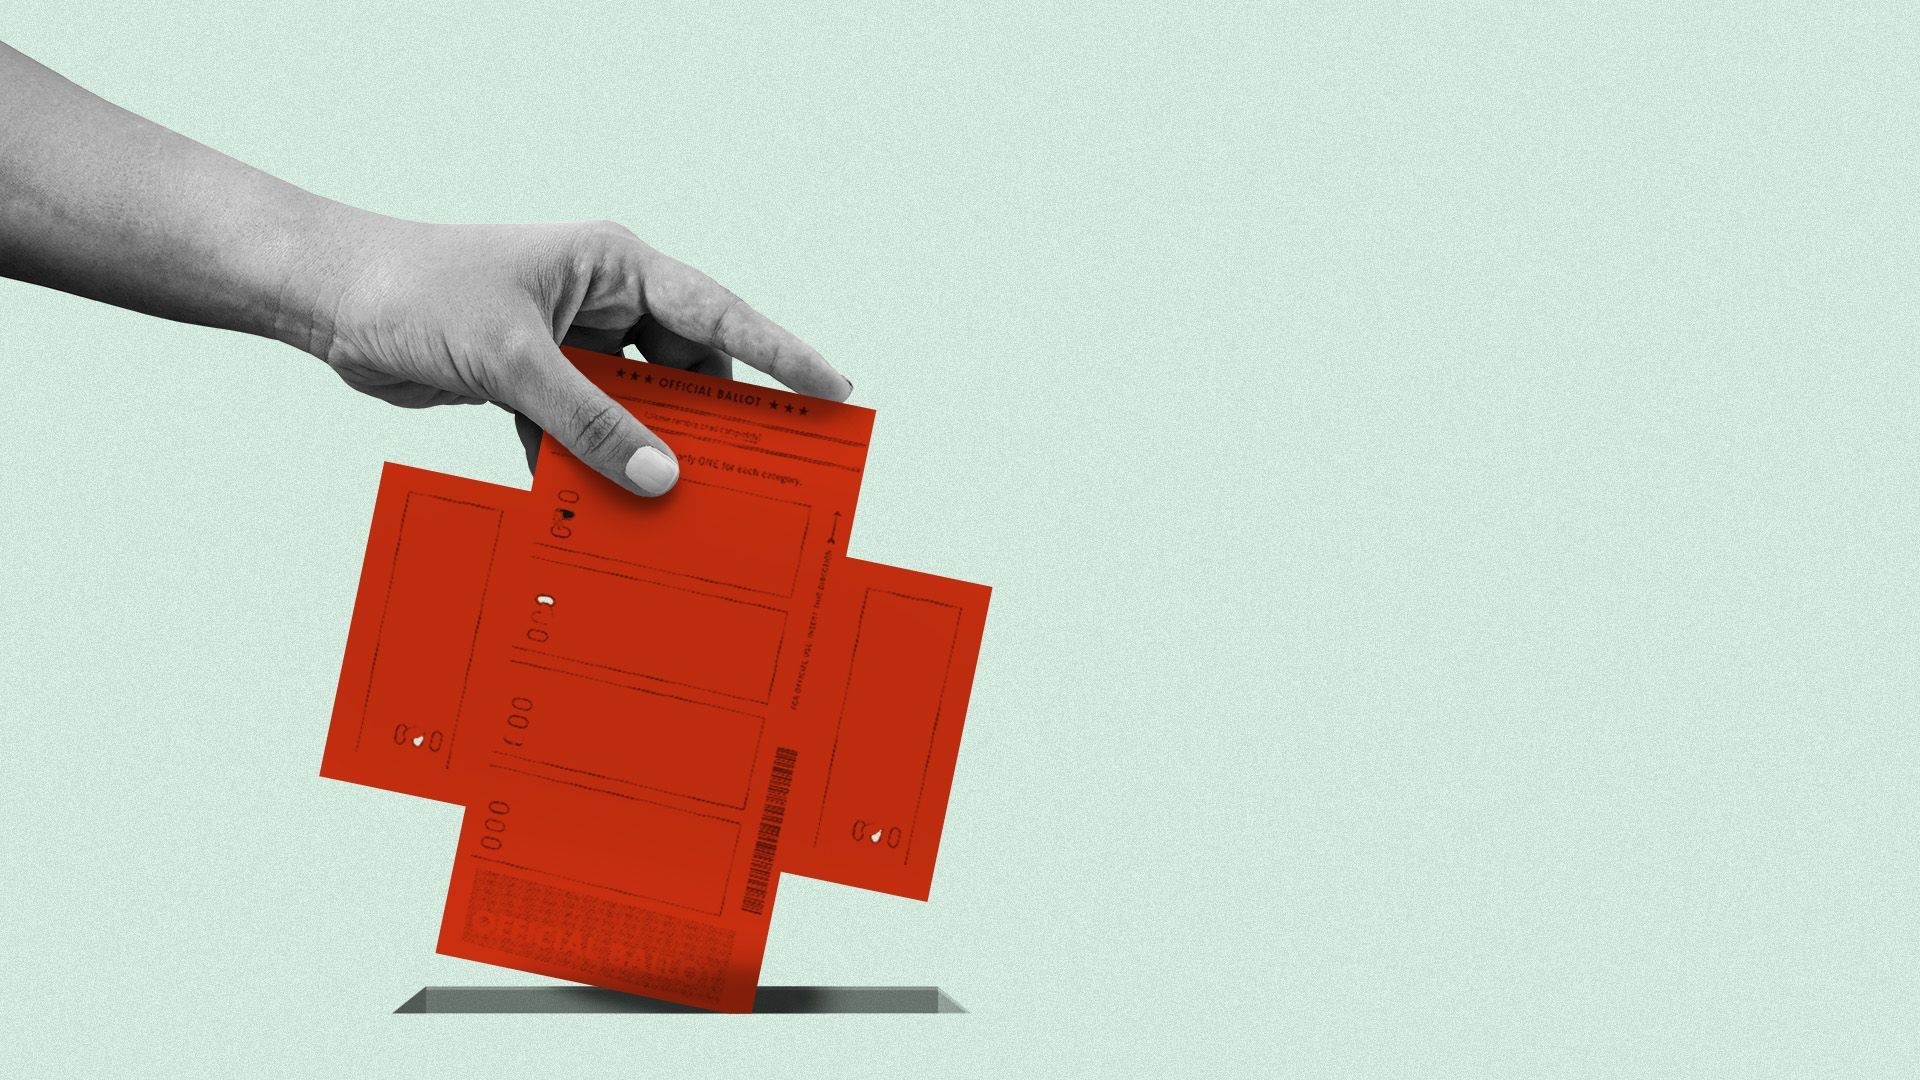 Illustration of a hand casting a ballot in the shape of a red cross